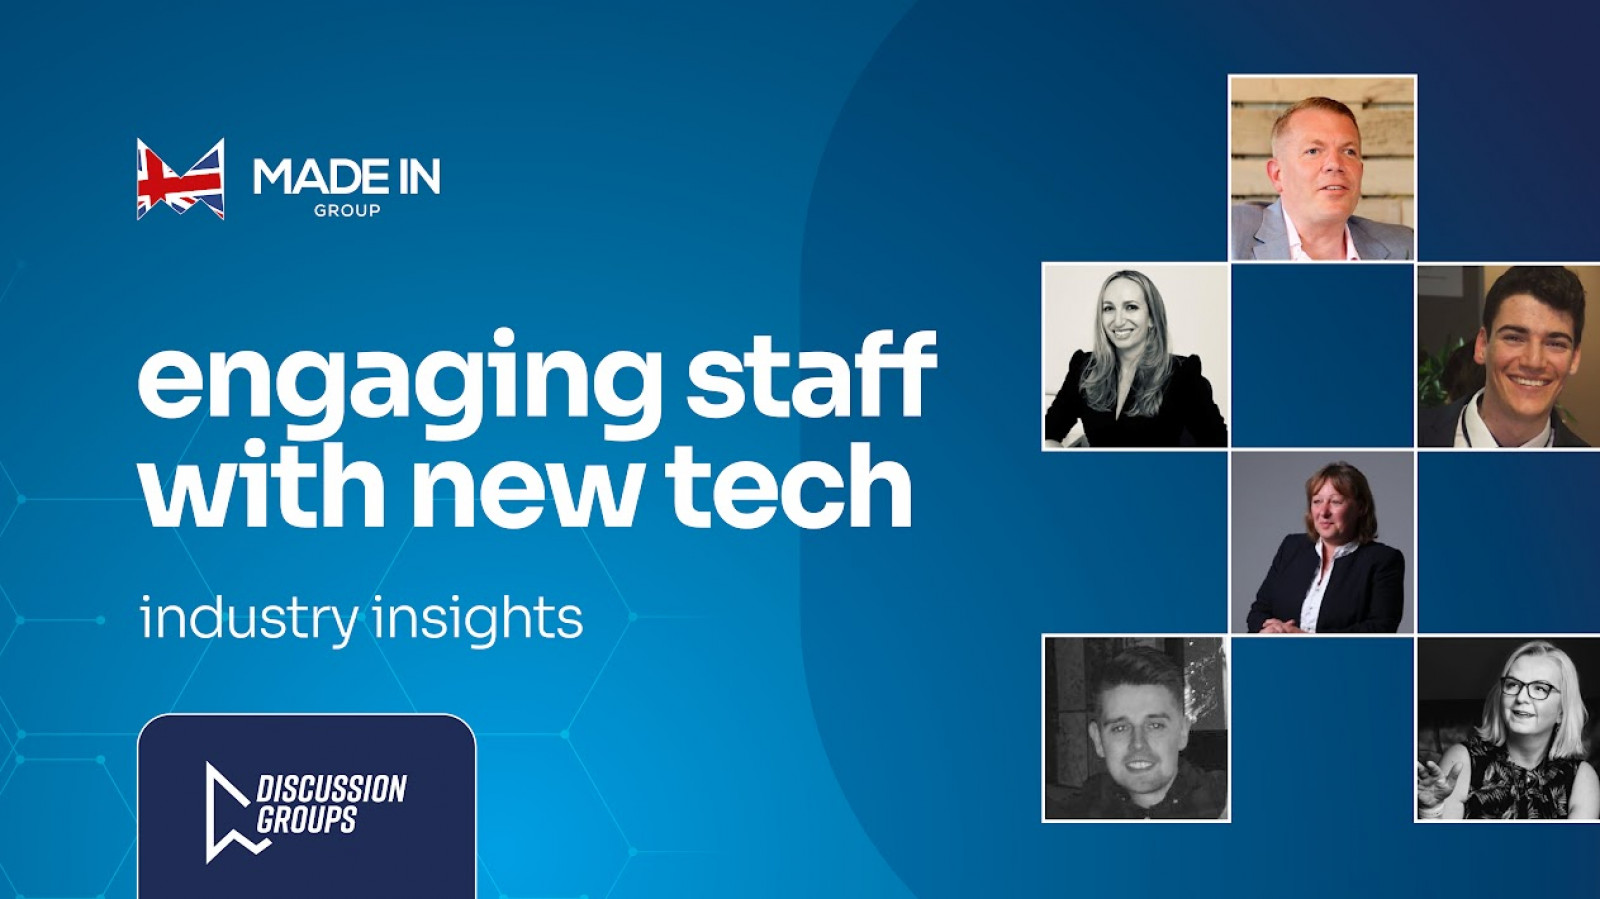 Industry Leaders Share Thoughts on Engaging Staff with New Technologies